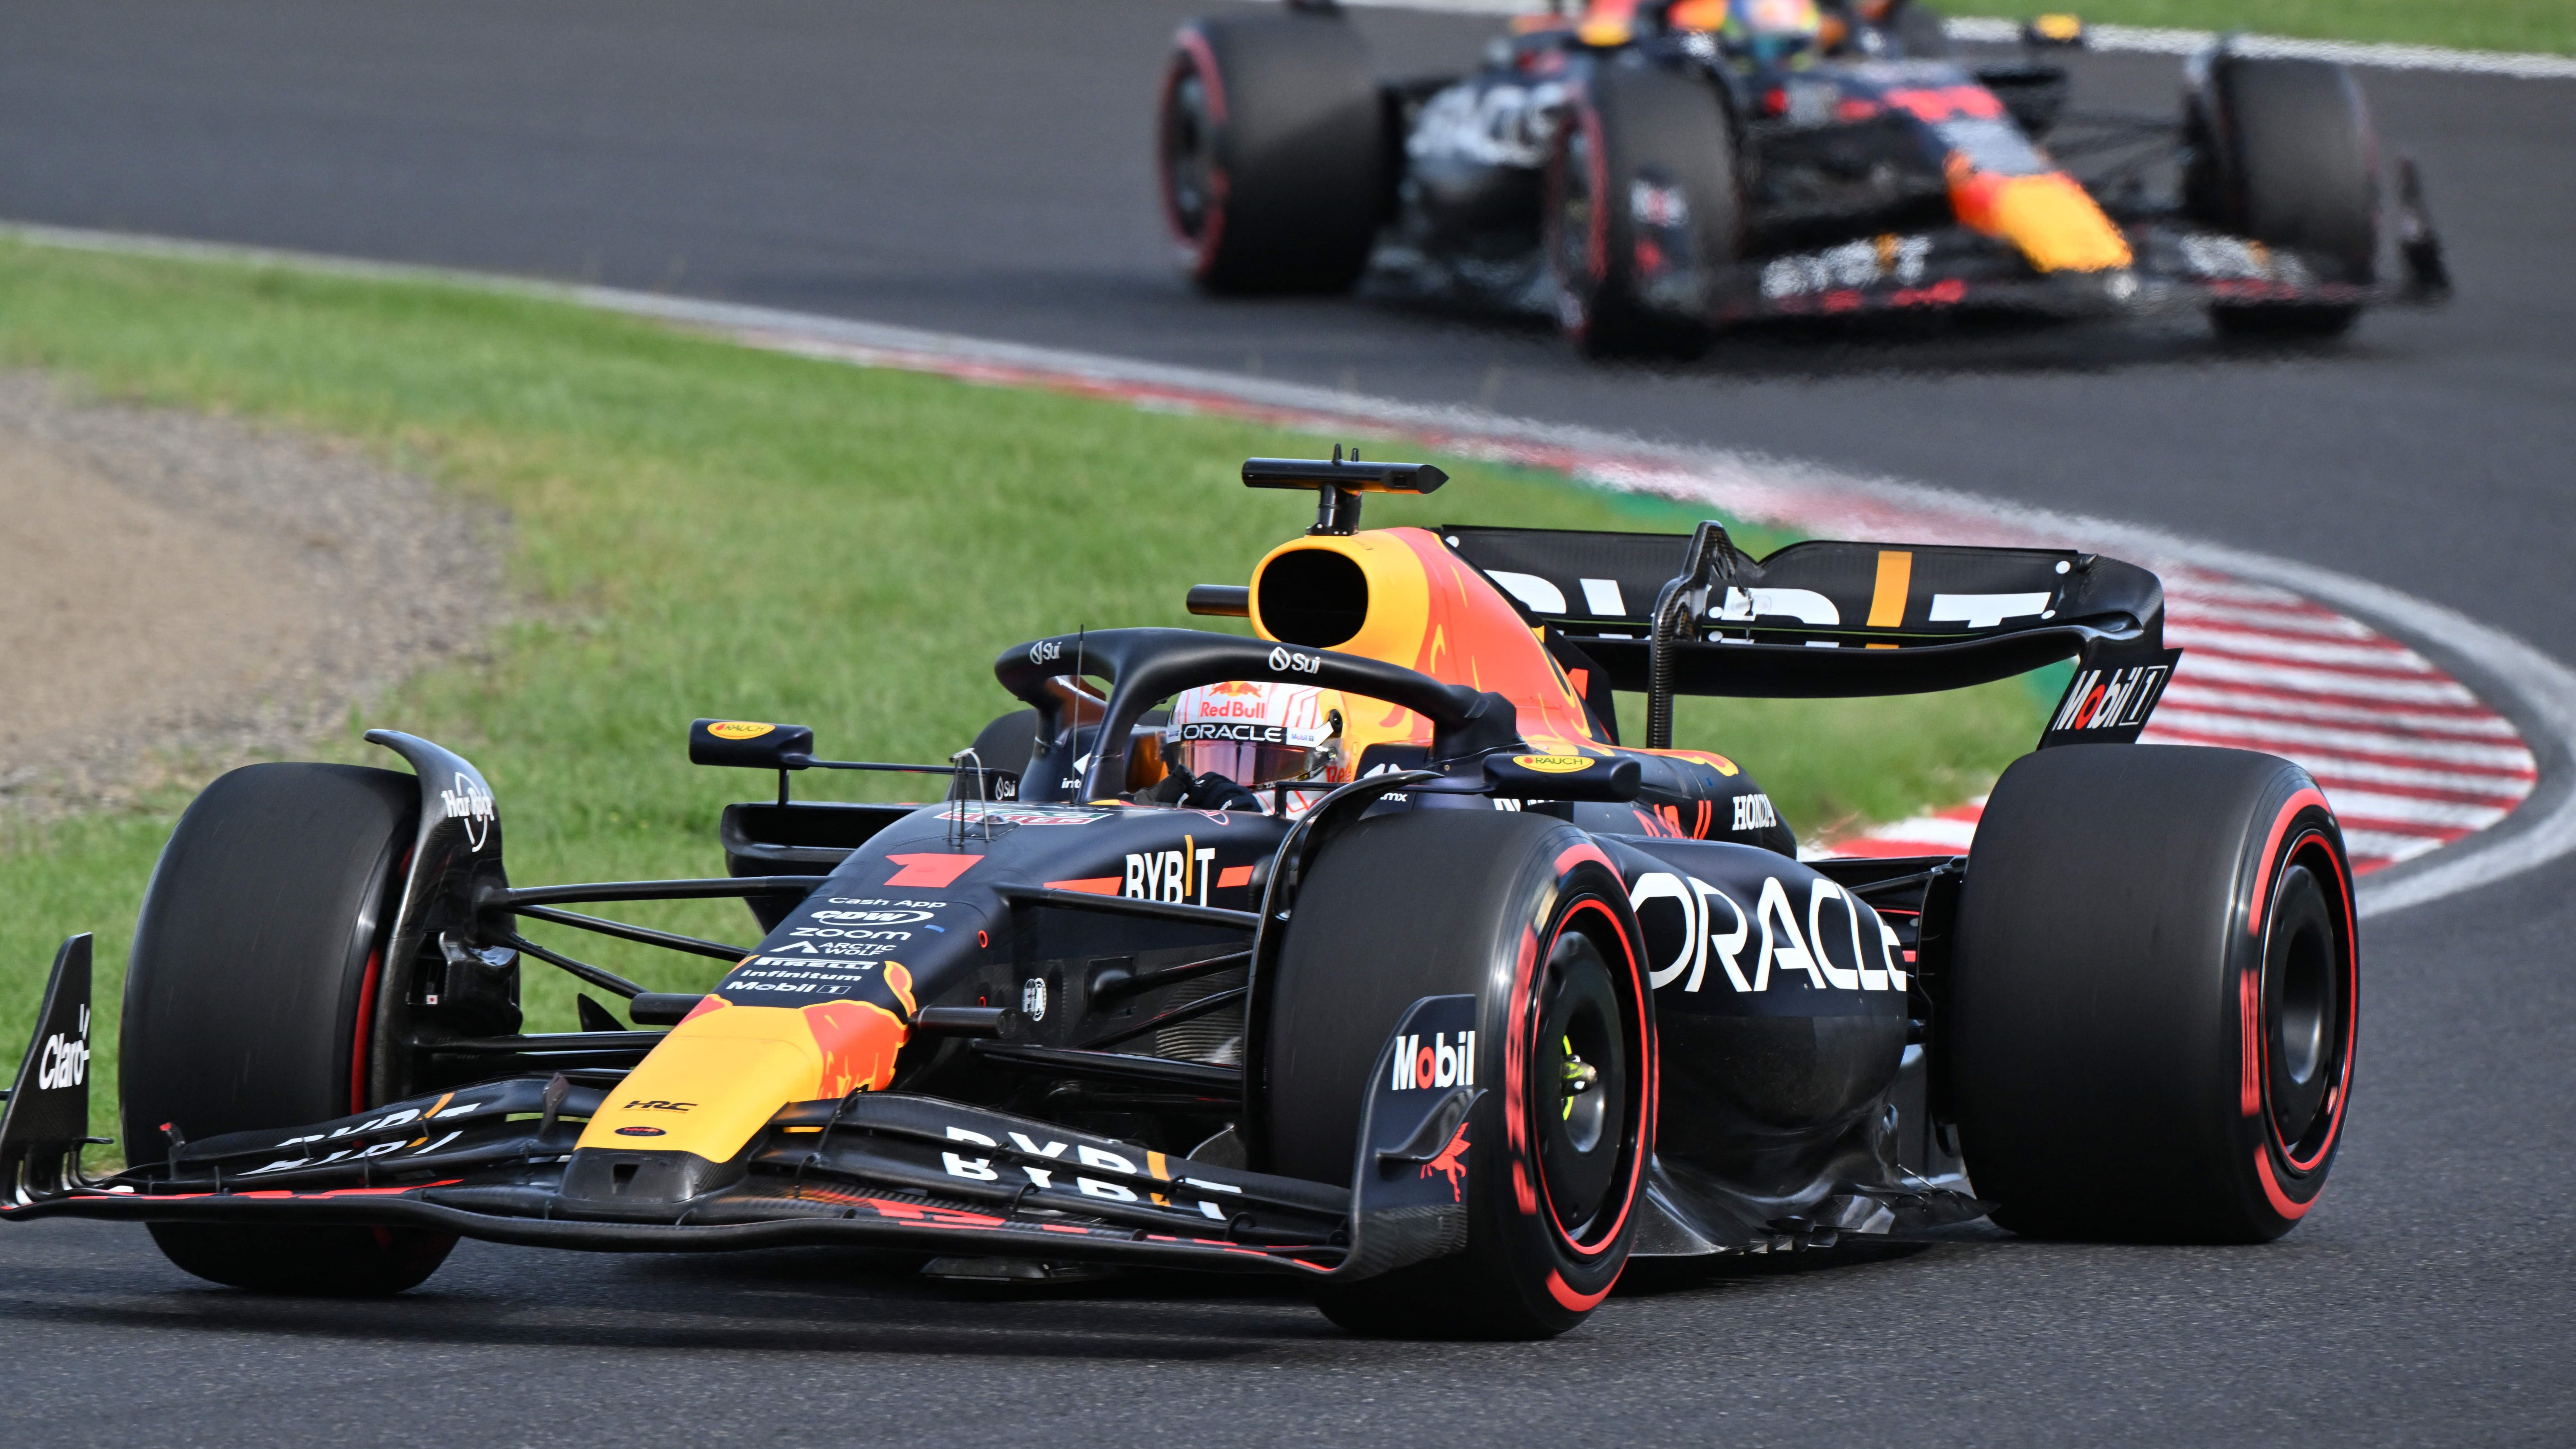 Japan Grand Prix live stream how to watch F1 online from anywhere